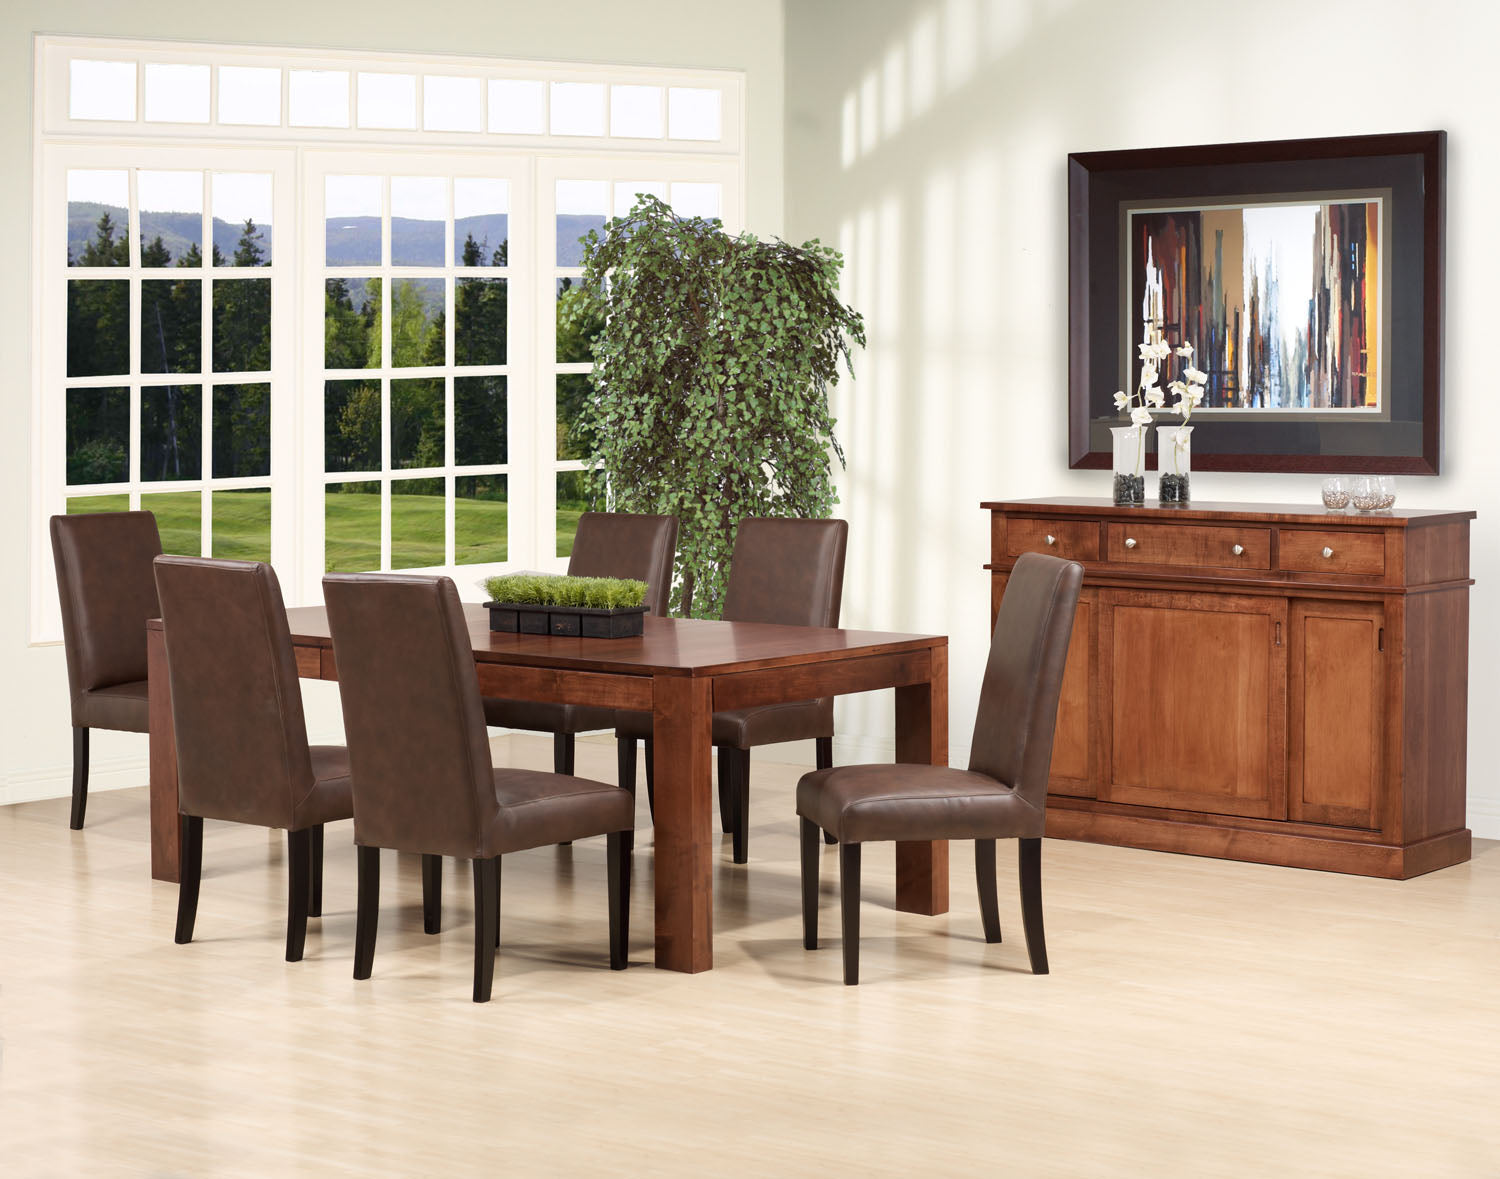 Chair as Shown | Cardinal Woodcraft Parsons Canadian Dining Chair | Valley Ridge Furniture